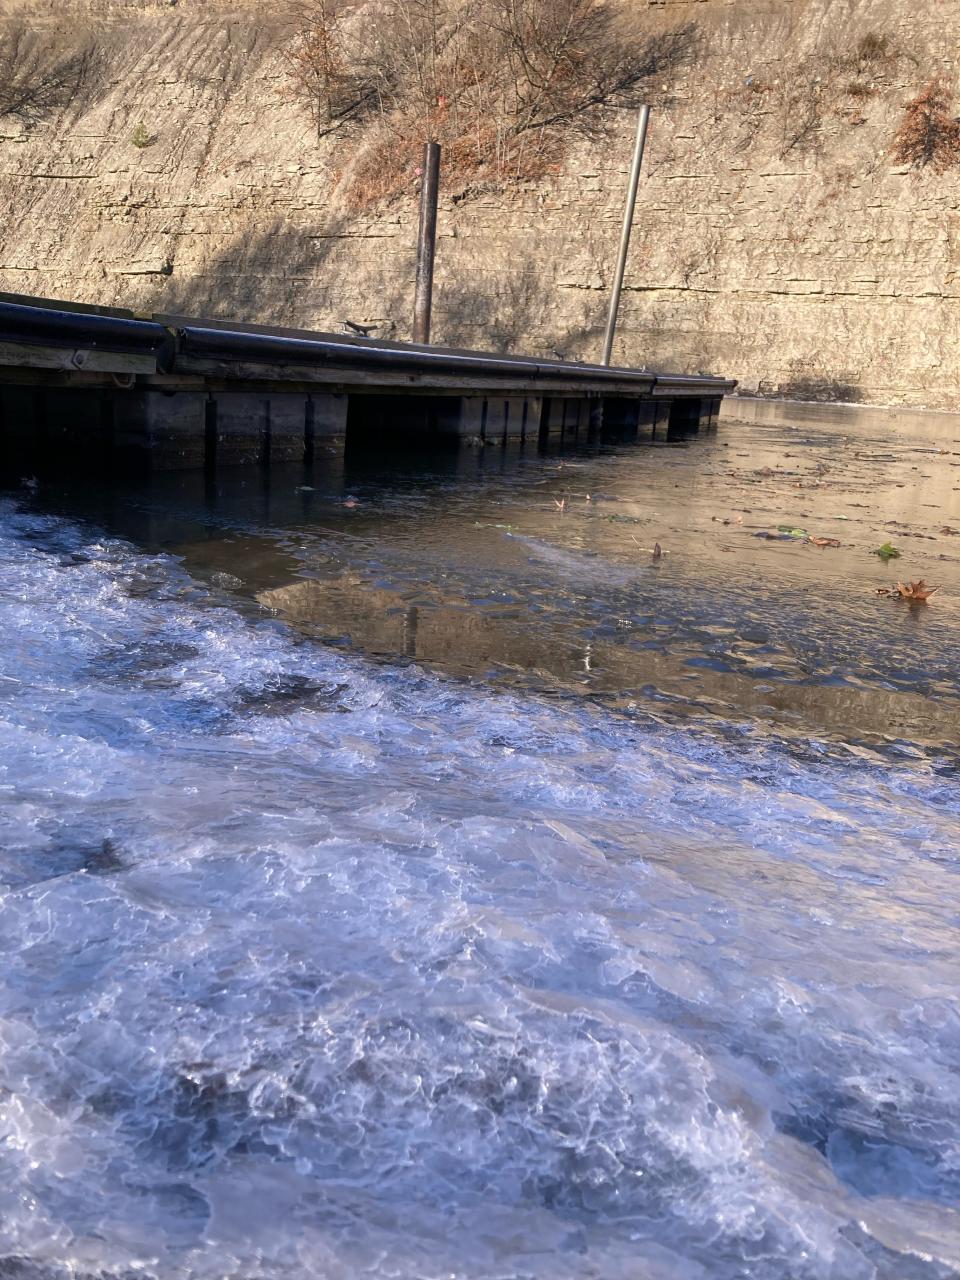 The launch ramp at Rocky River was iced in on the morning of Nov. 22 when Art Holden and Gene Post were trying to get out to Lake Erie to fish for walleye.